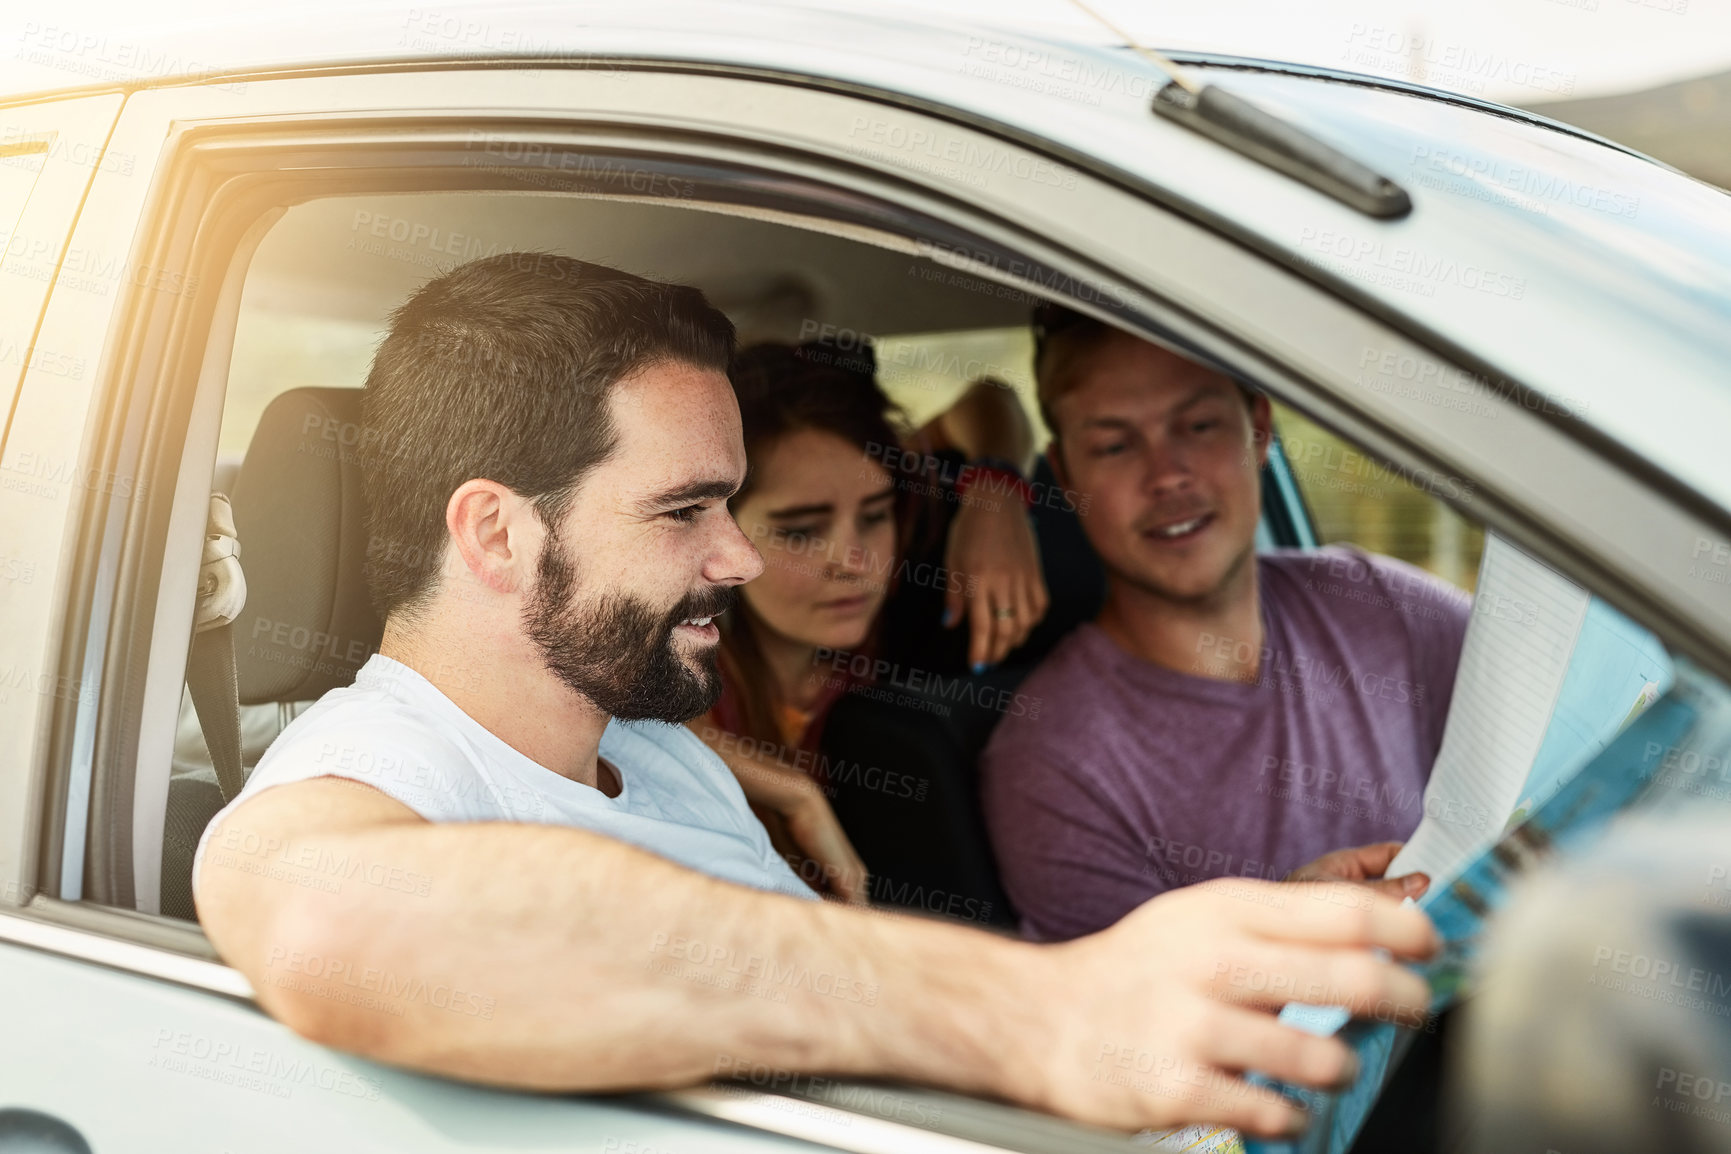 Buy stock photo Shot of a group of young friends getting ready to drive to their destination in their vehicle while looking at a map